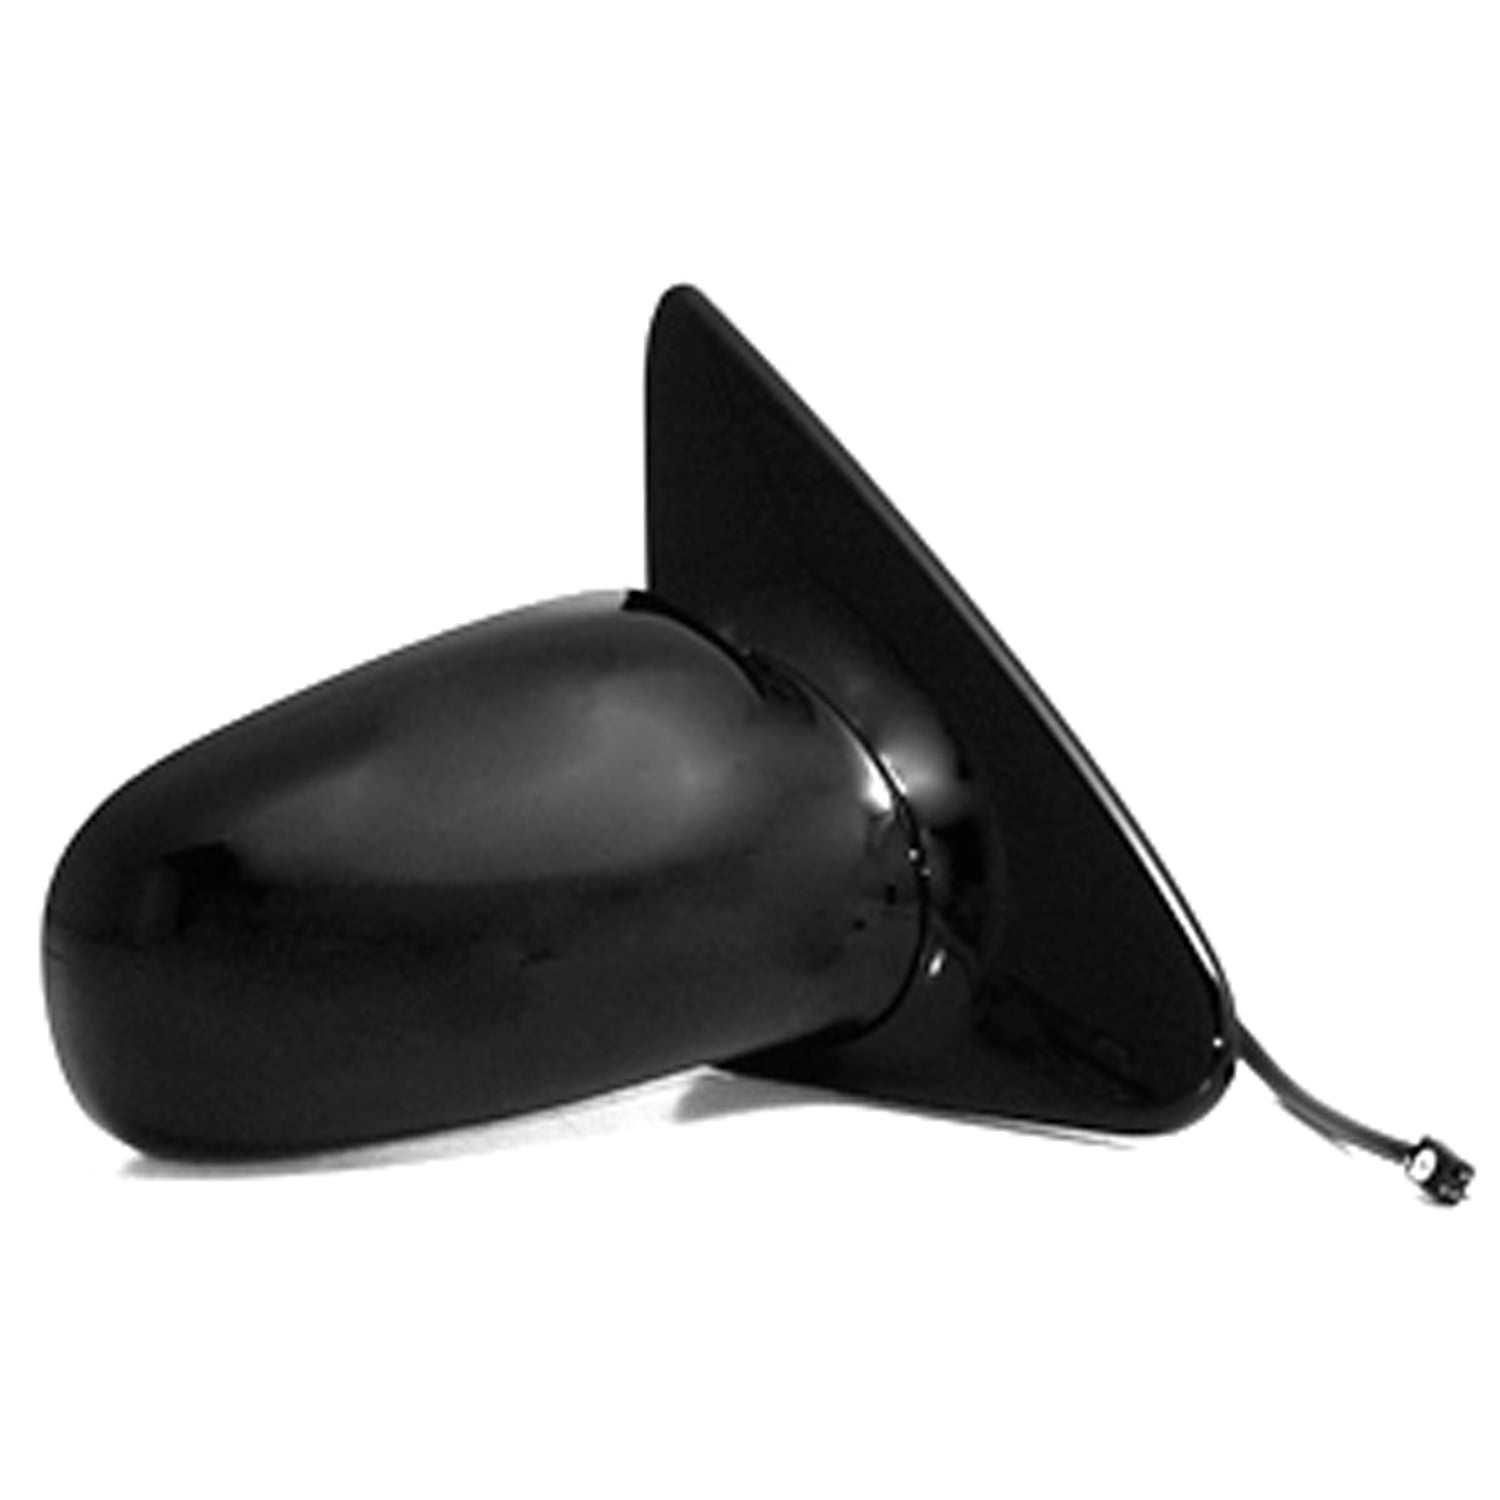 New GM1320149 Driver Side Mirror for Chevrolet Cavalier 1995-2005 